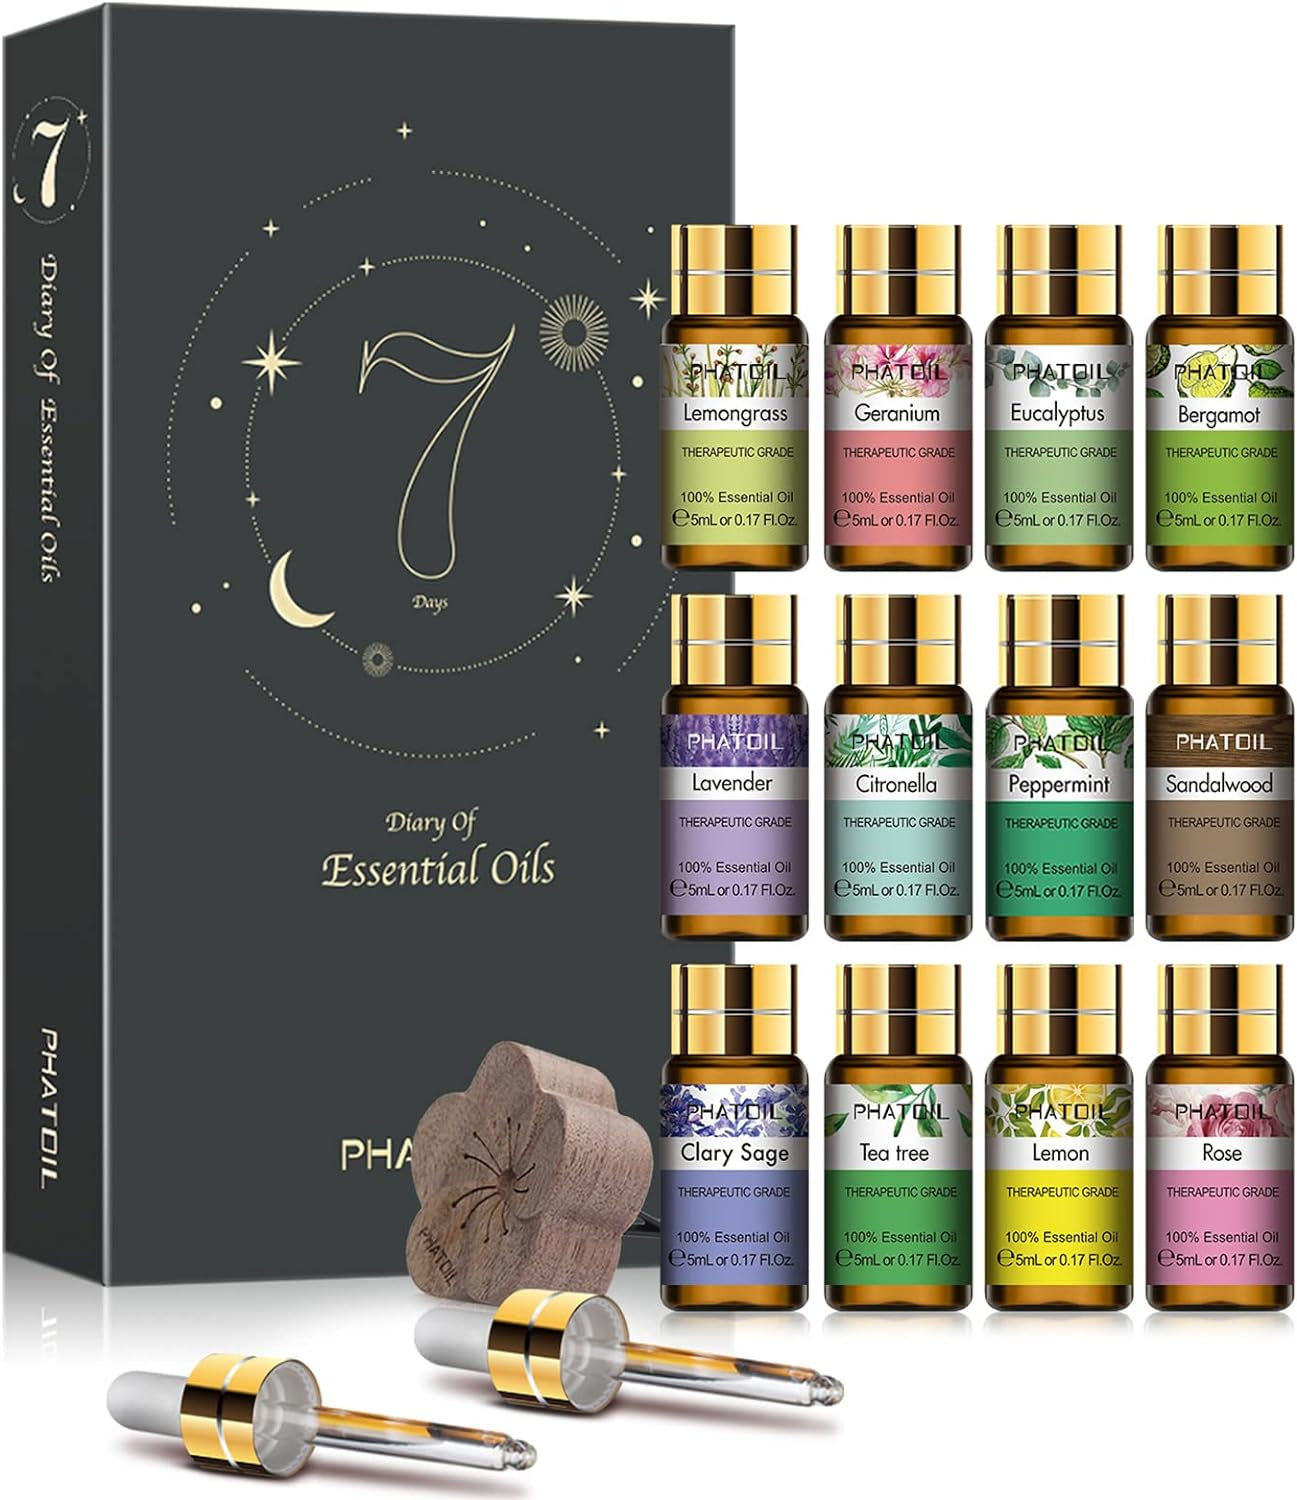 12PCS Bergamot Essential Oils Set with Diffused Wood and Nice Box, 5Ml Essential Oils for Diffusers for Home, Gifts for Families and Friends